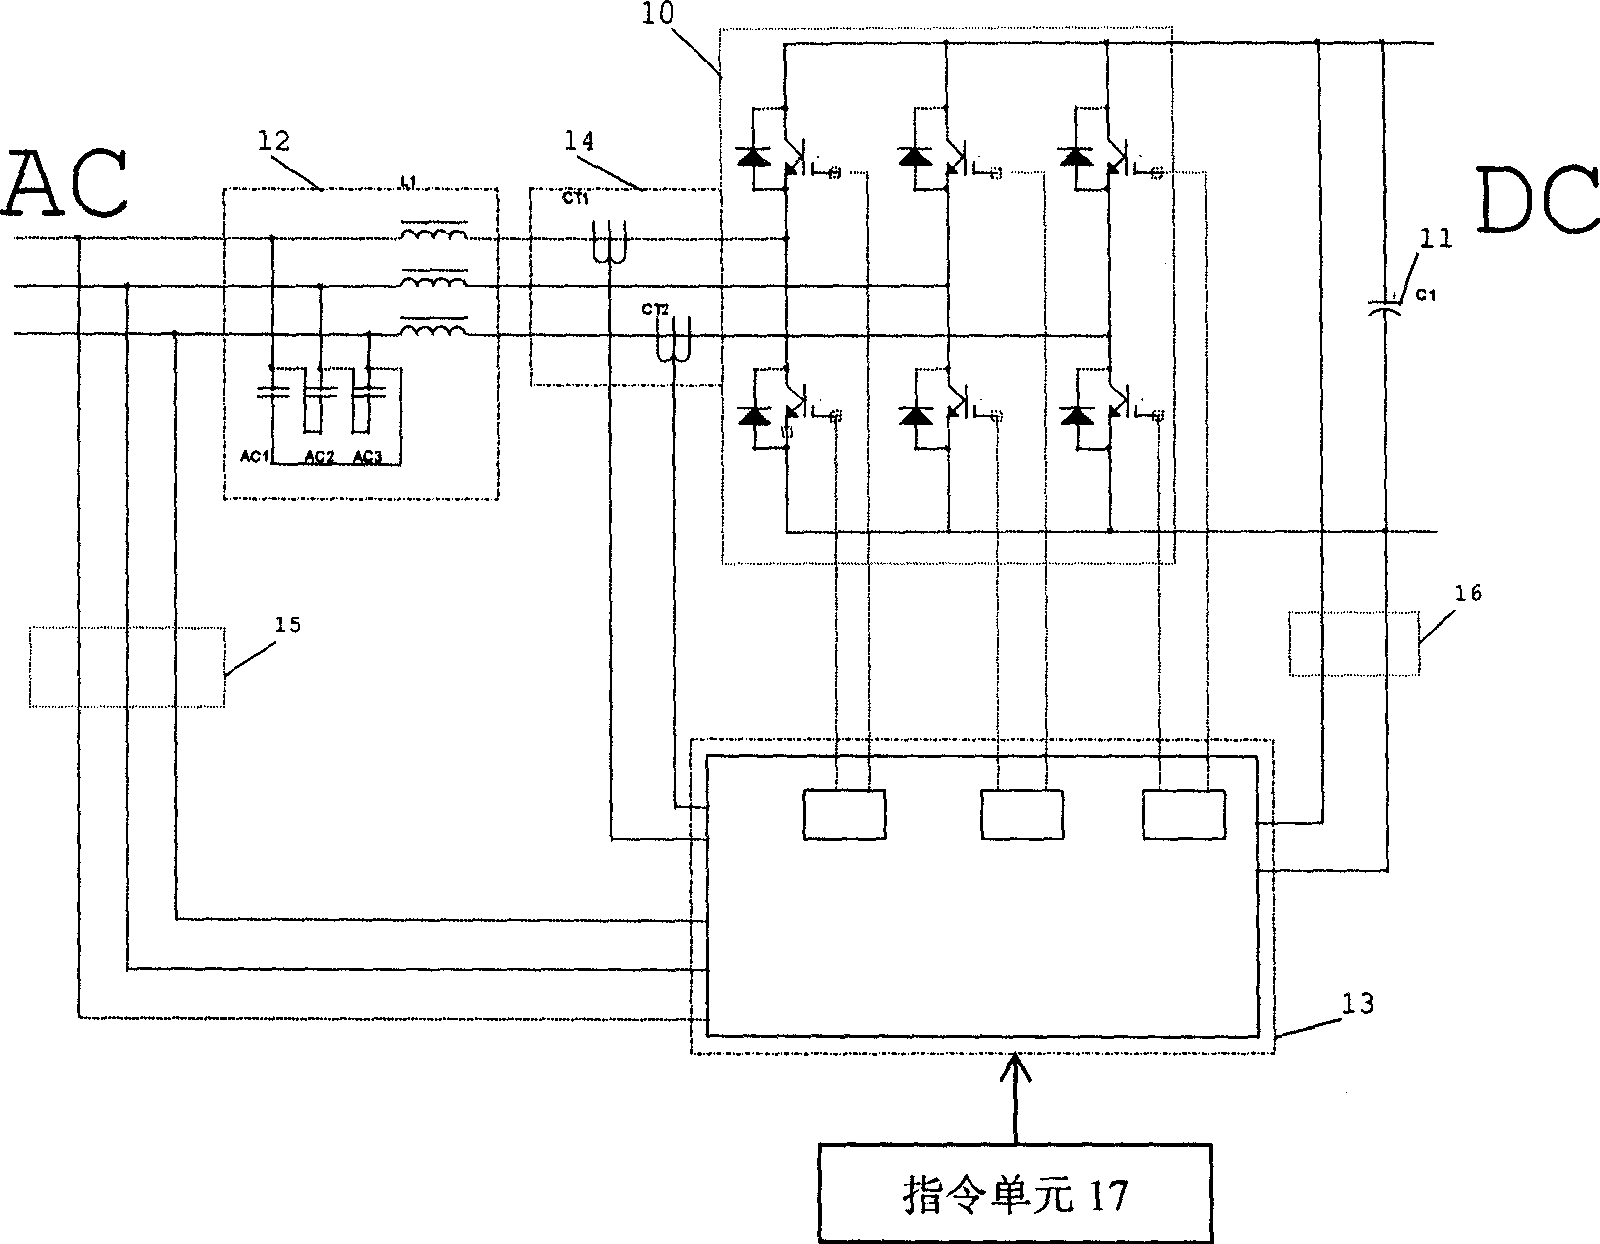 Power supply converter with rectification/inversion switching function